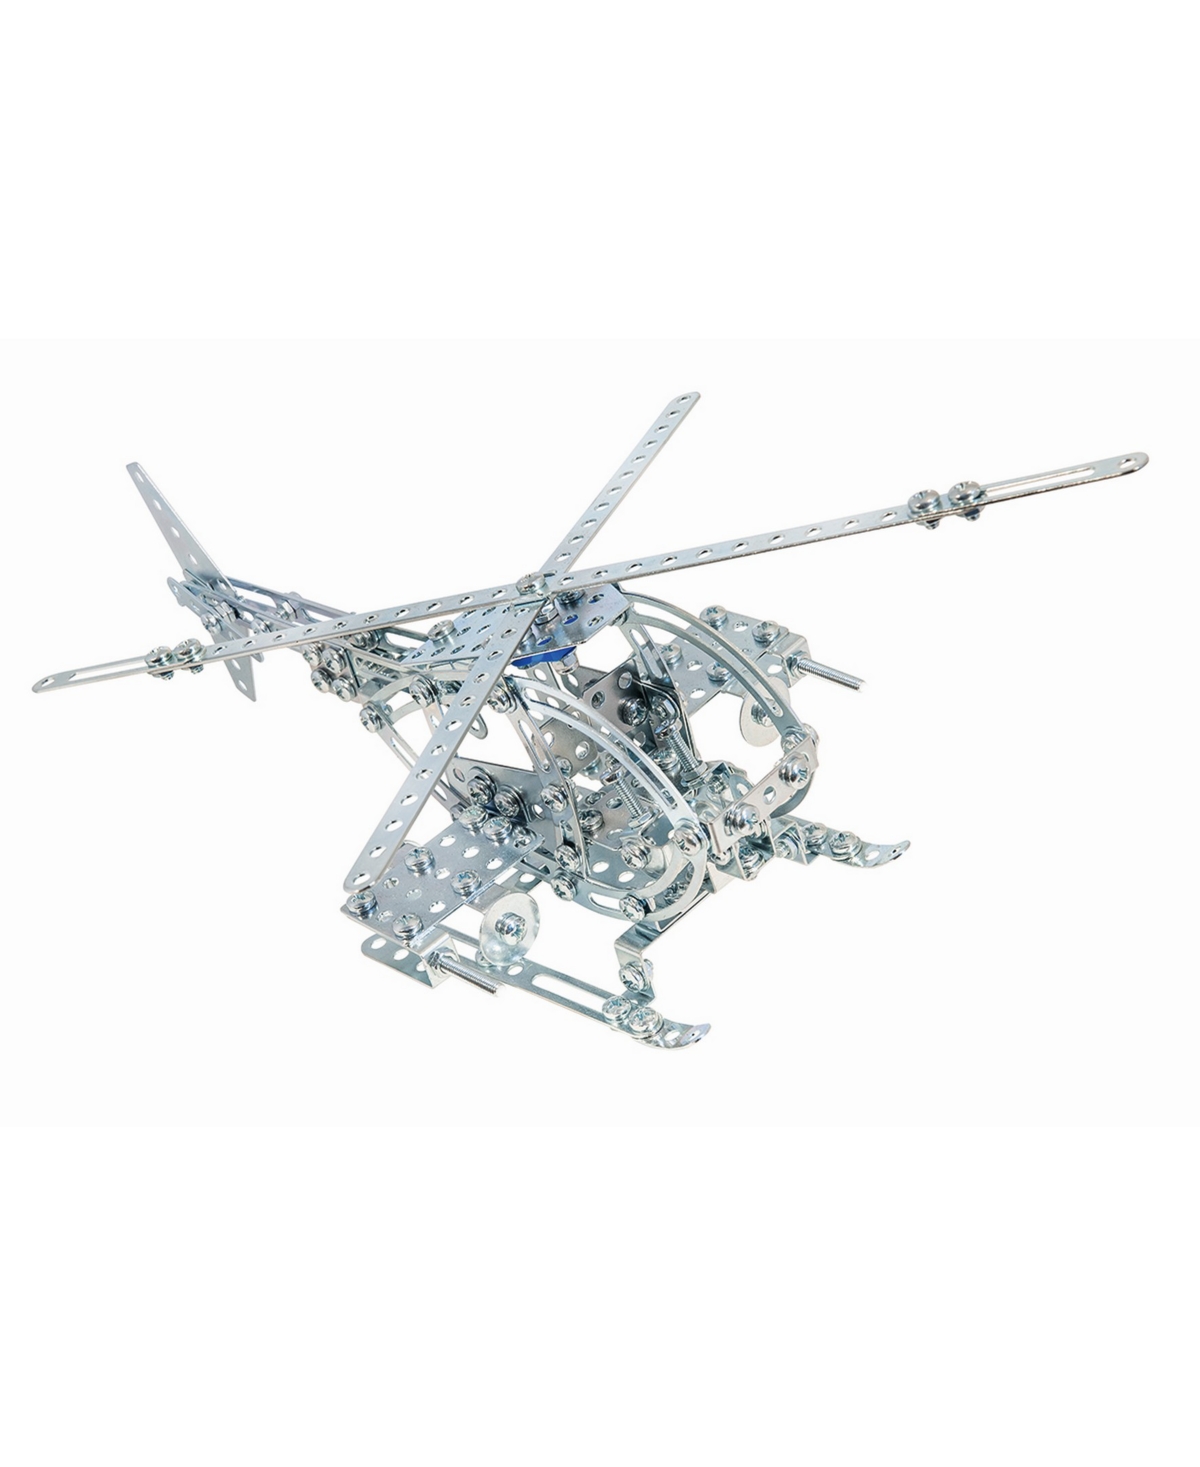 Eitech Kids' Army Helicopter 310 Piece Construction Set In Steel